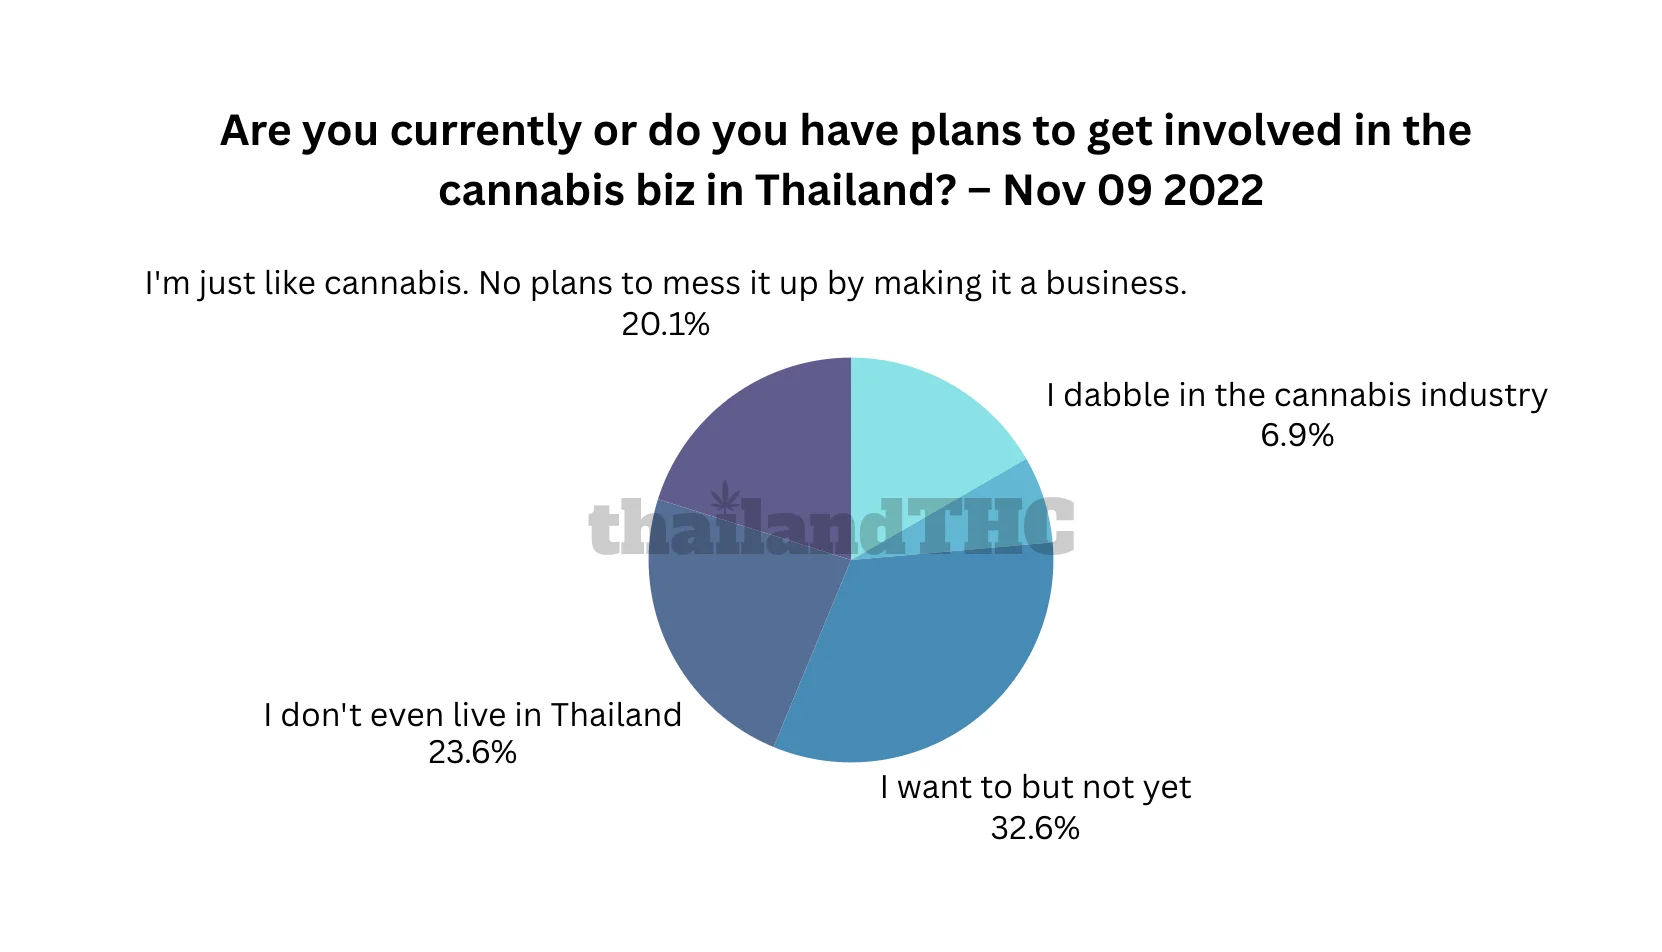 Are you currently or do you have plans to get involved in the cannabis biz in Thailand? – Nov 09 2022